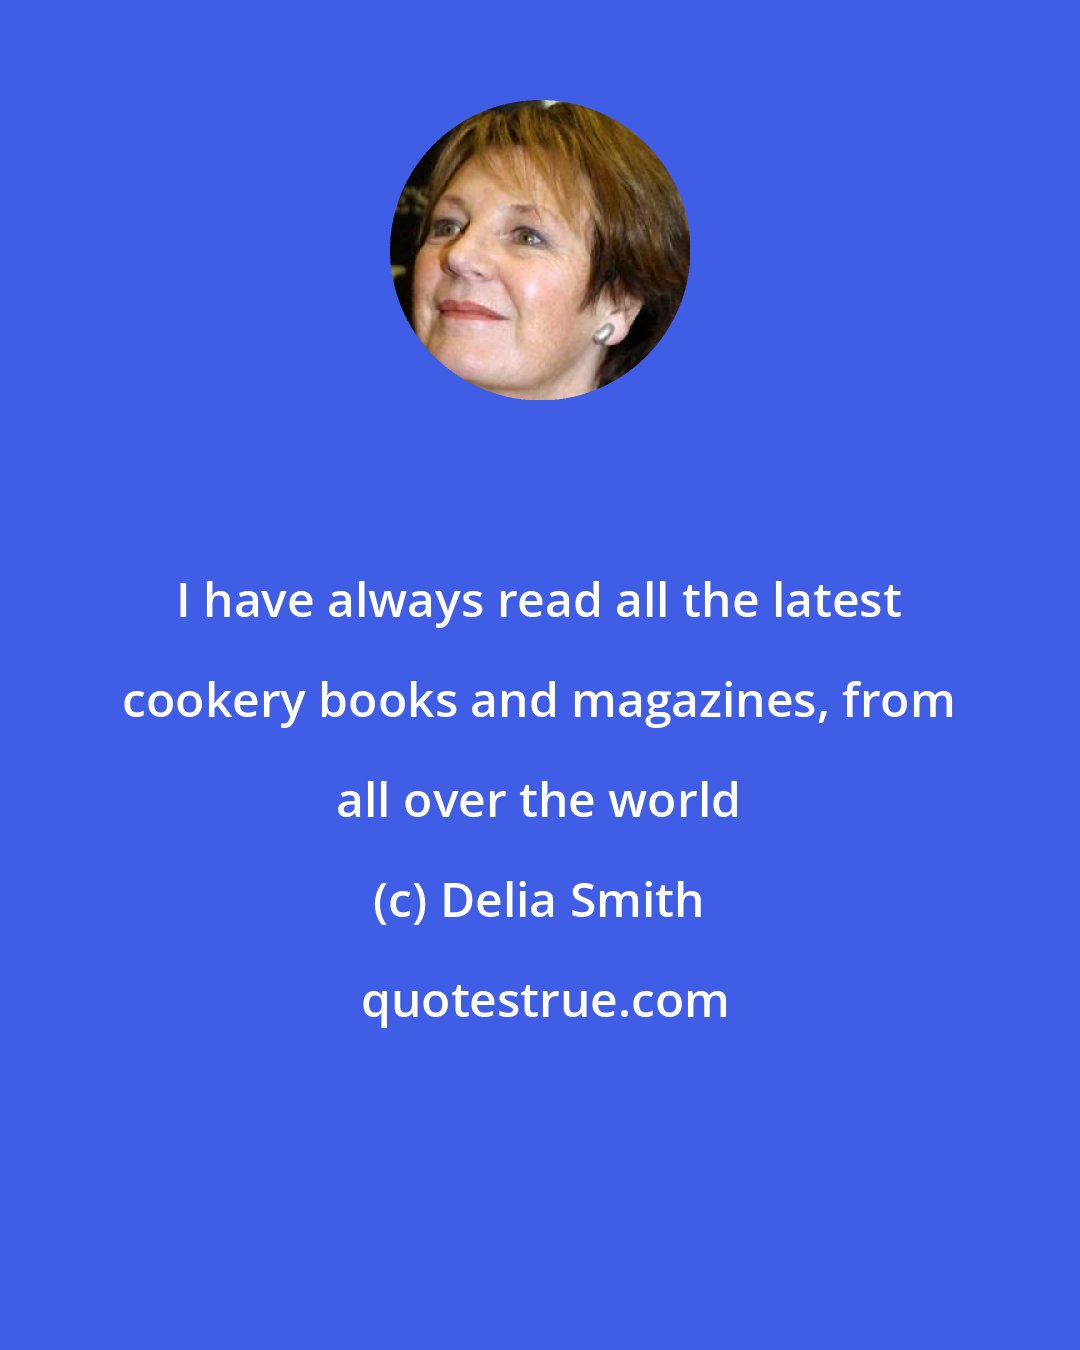 Delia Smith: I have always read all the latest cookery books and magazines, from all over the world